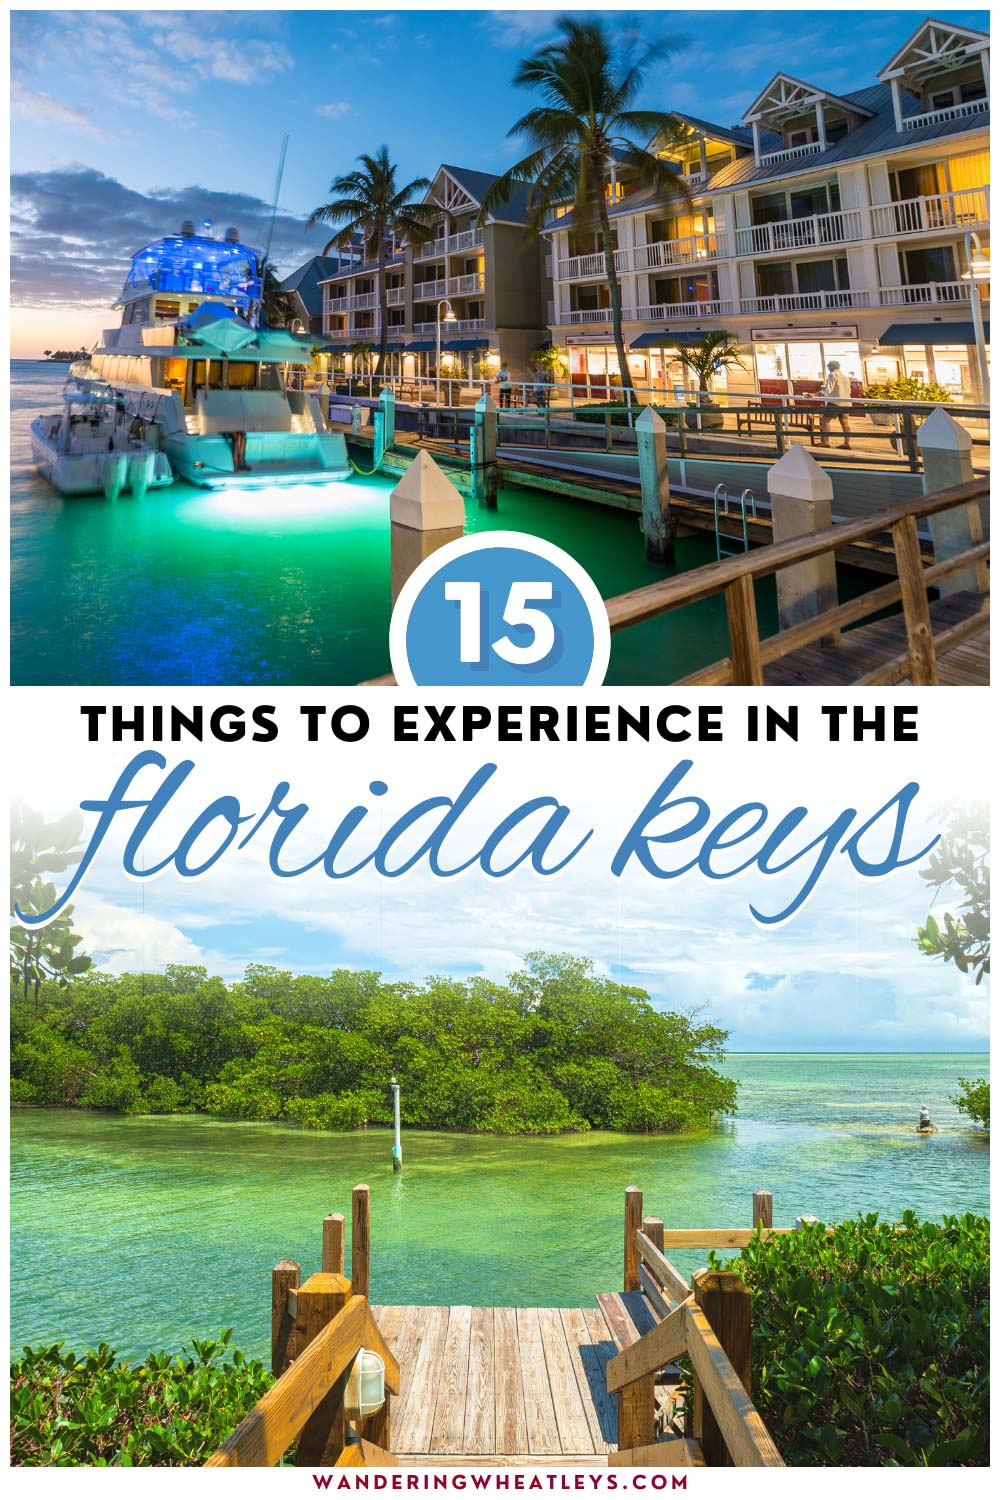 Best Things to do in the Florida Keys